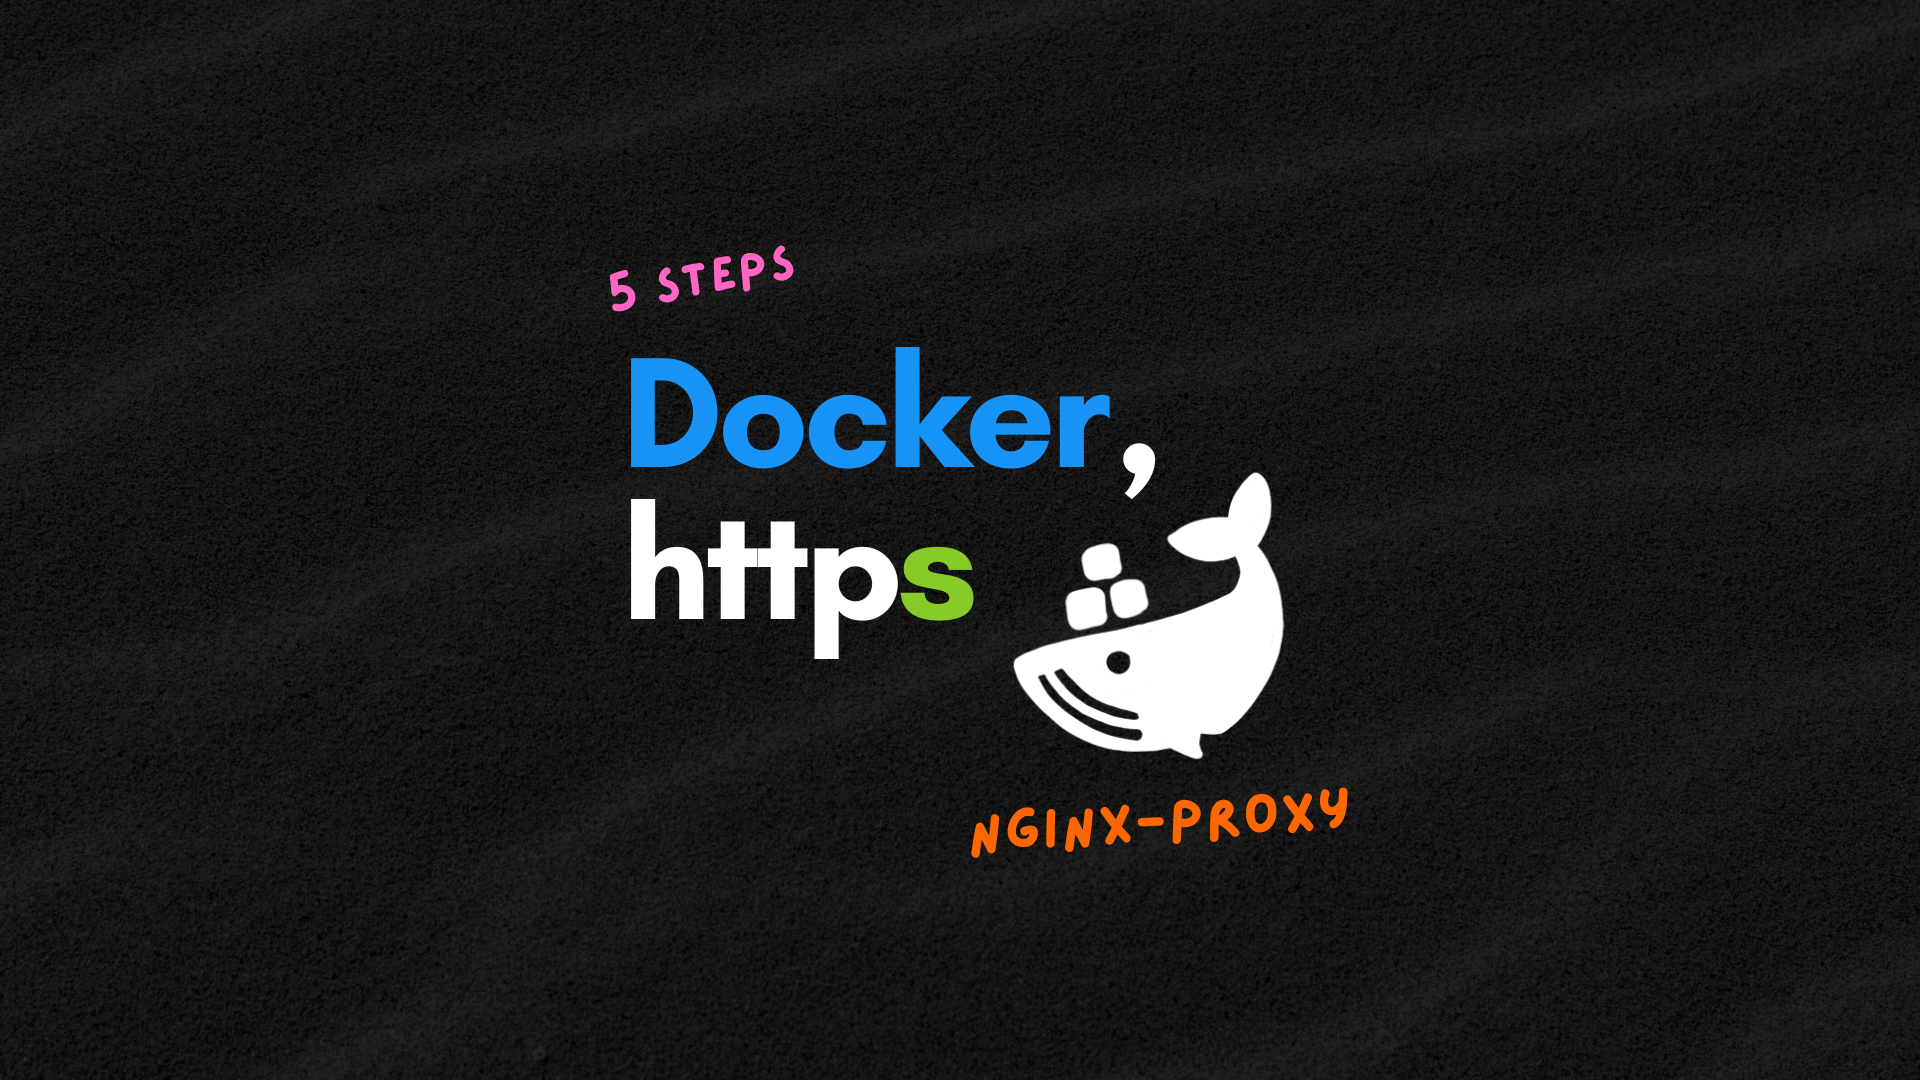 5 steps to set up reverse proxy and HTTPS for Docker container using nginx-proxy